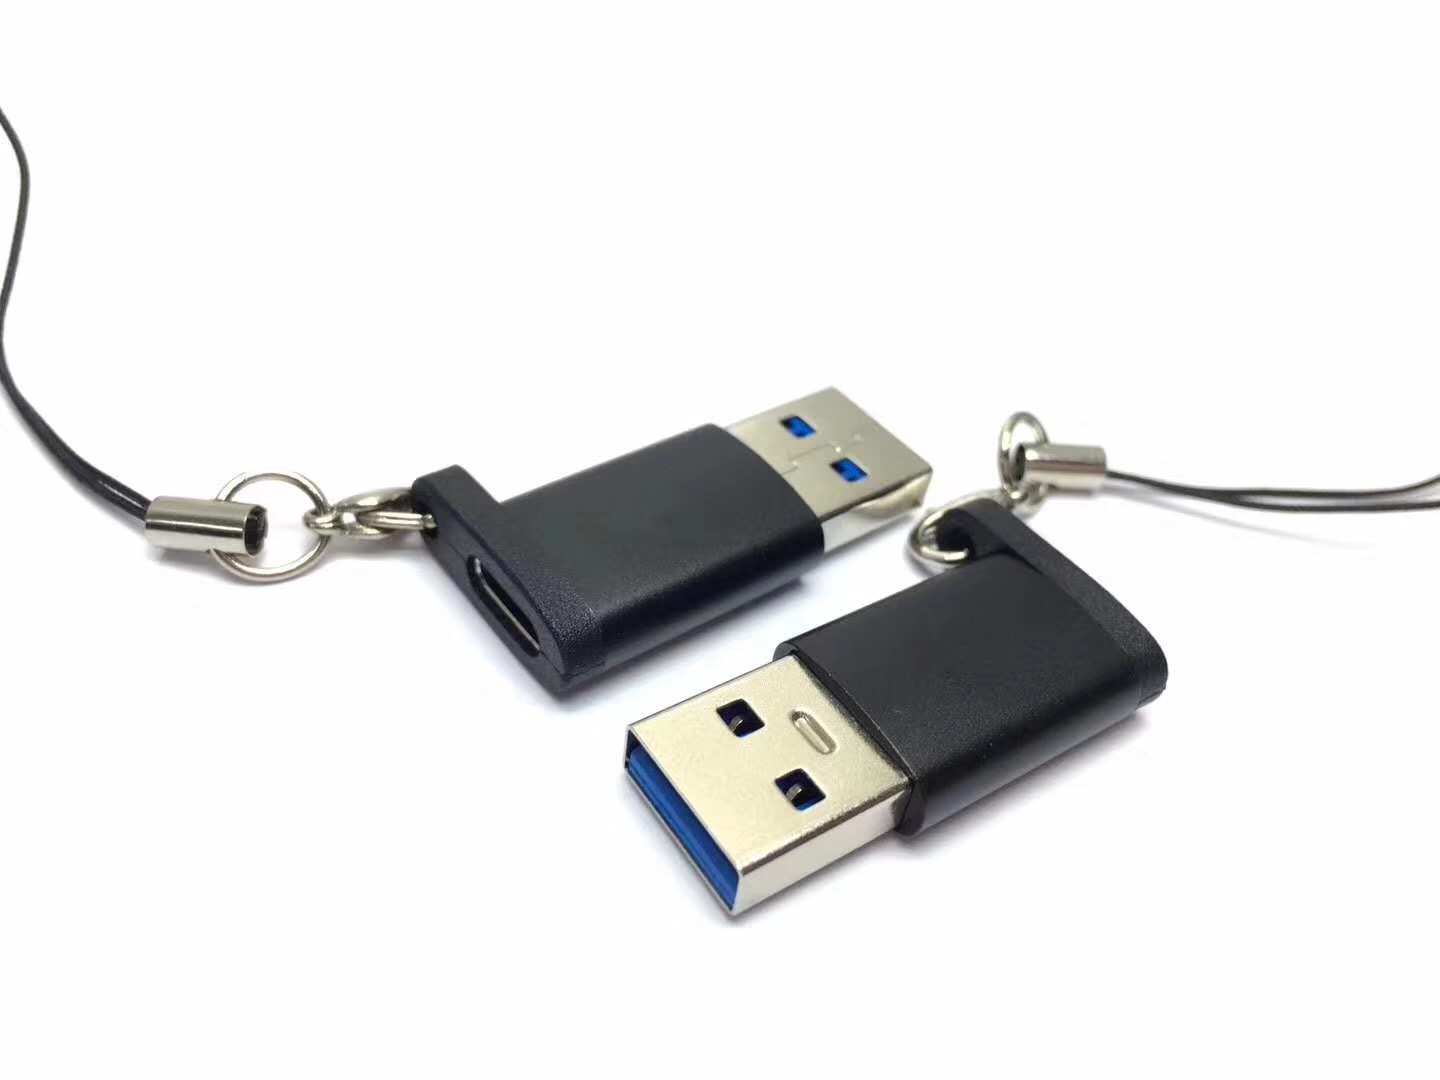 USB C F to USB 3.0 M Adapter with Key Ring 